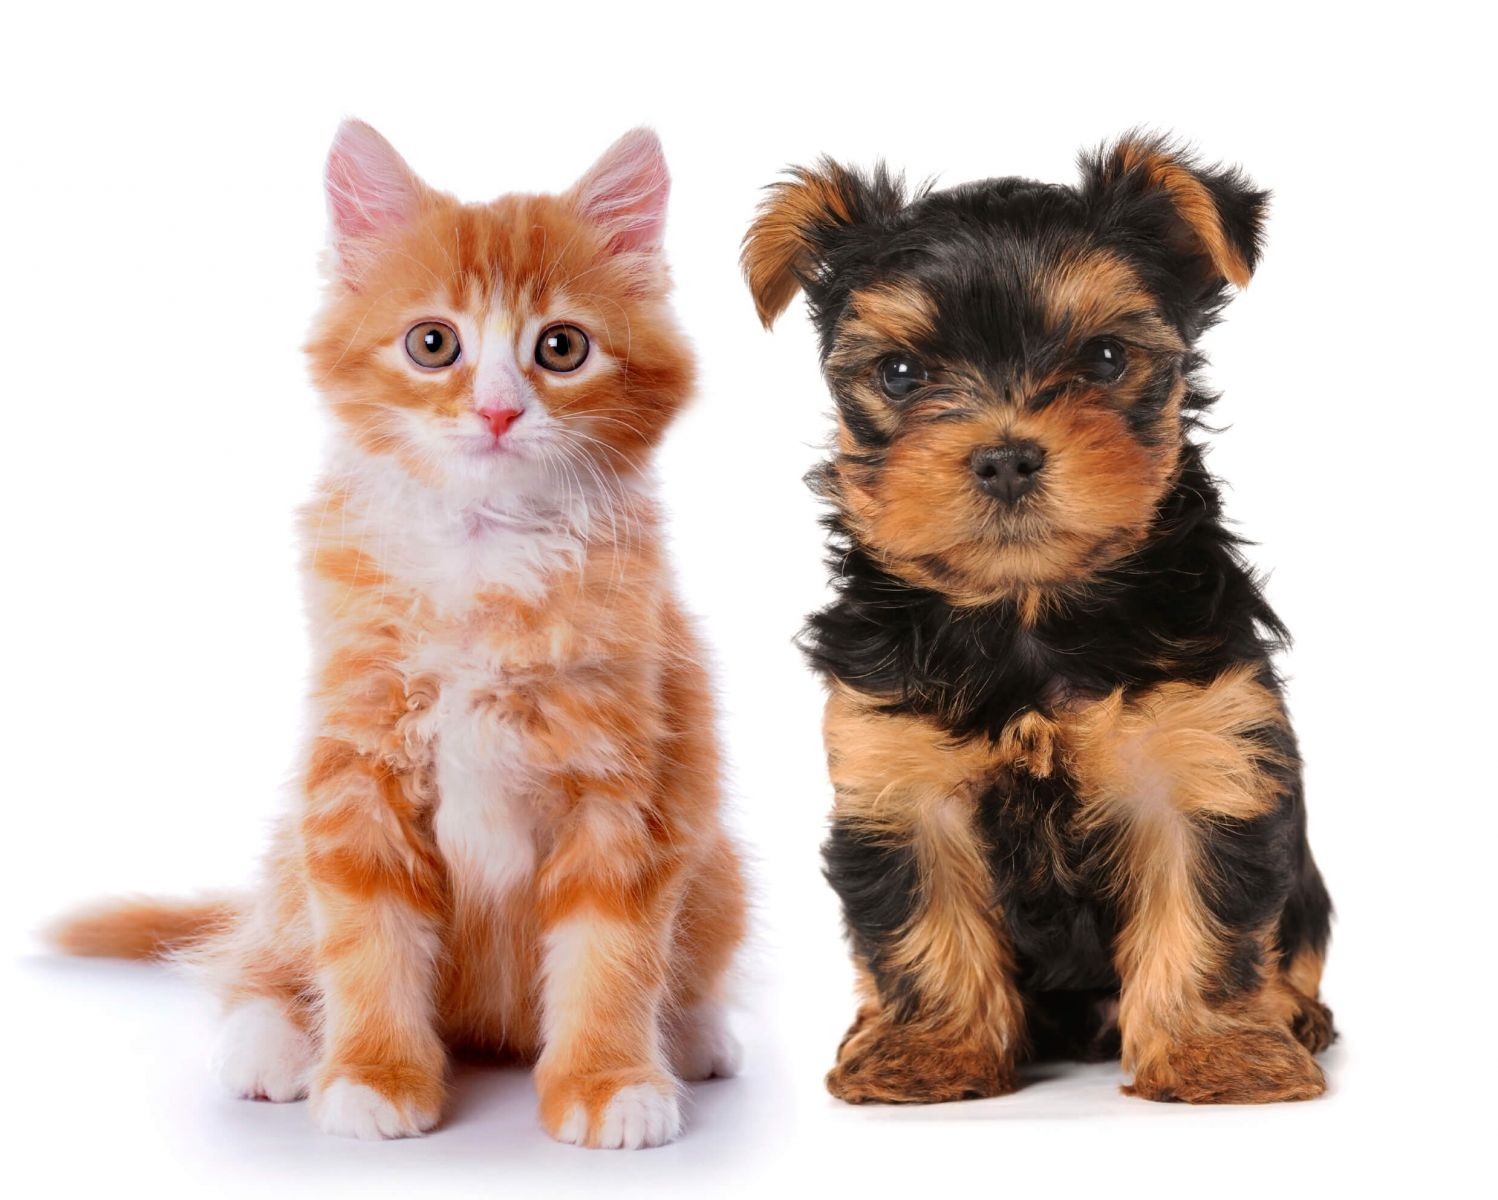 Cute kitten and puppy